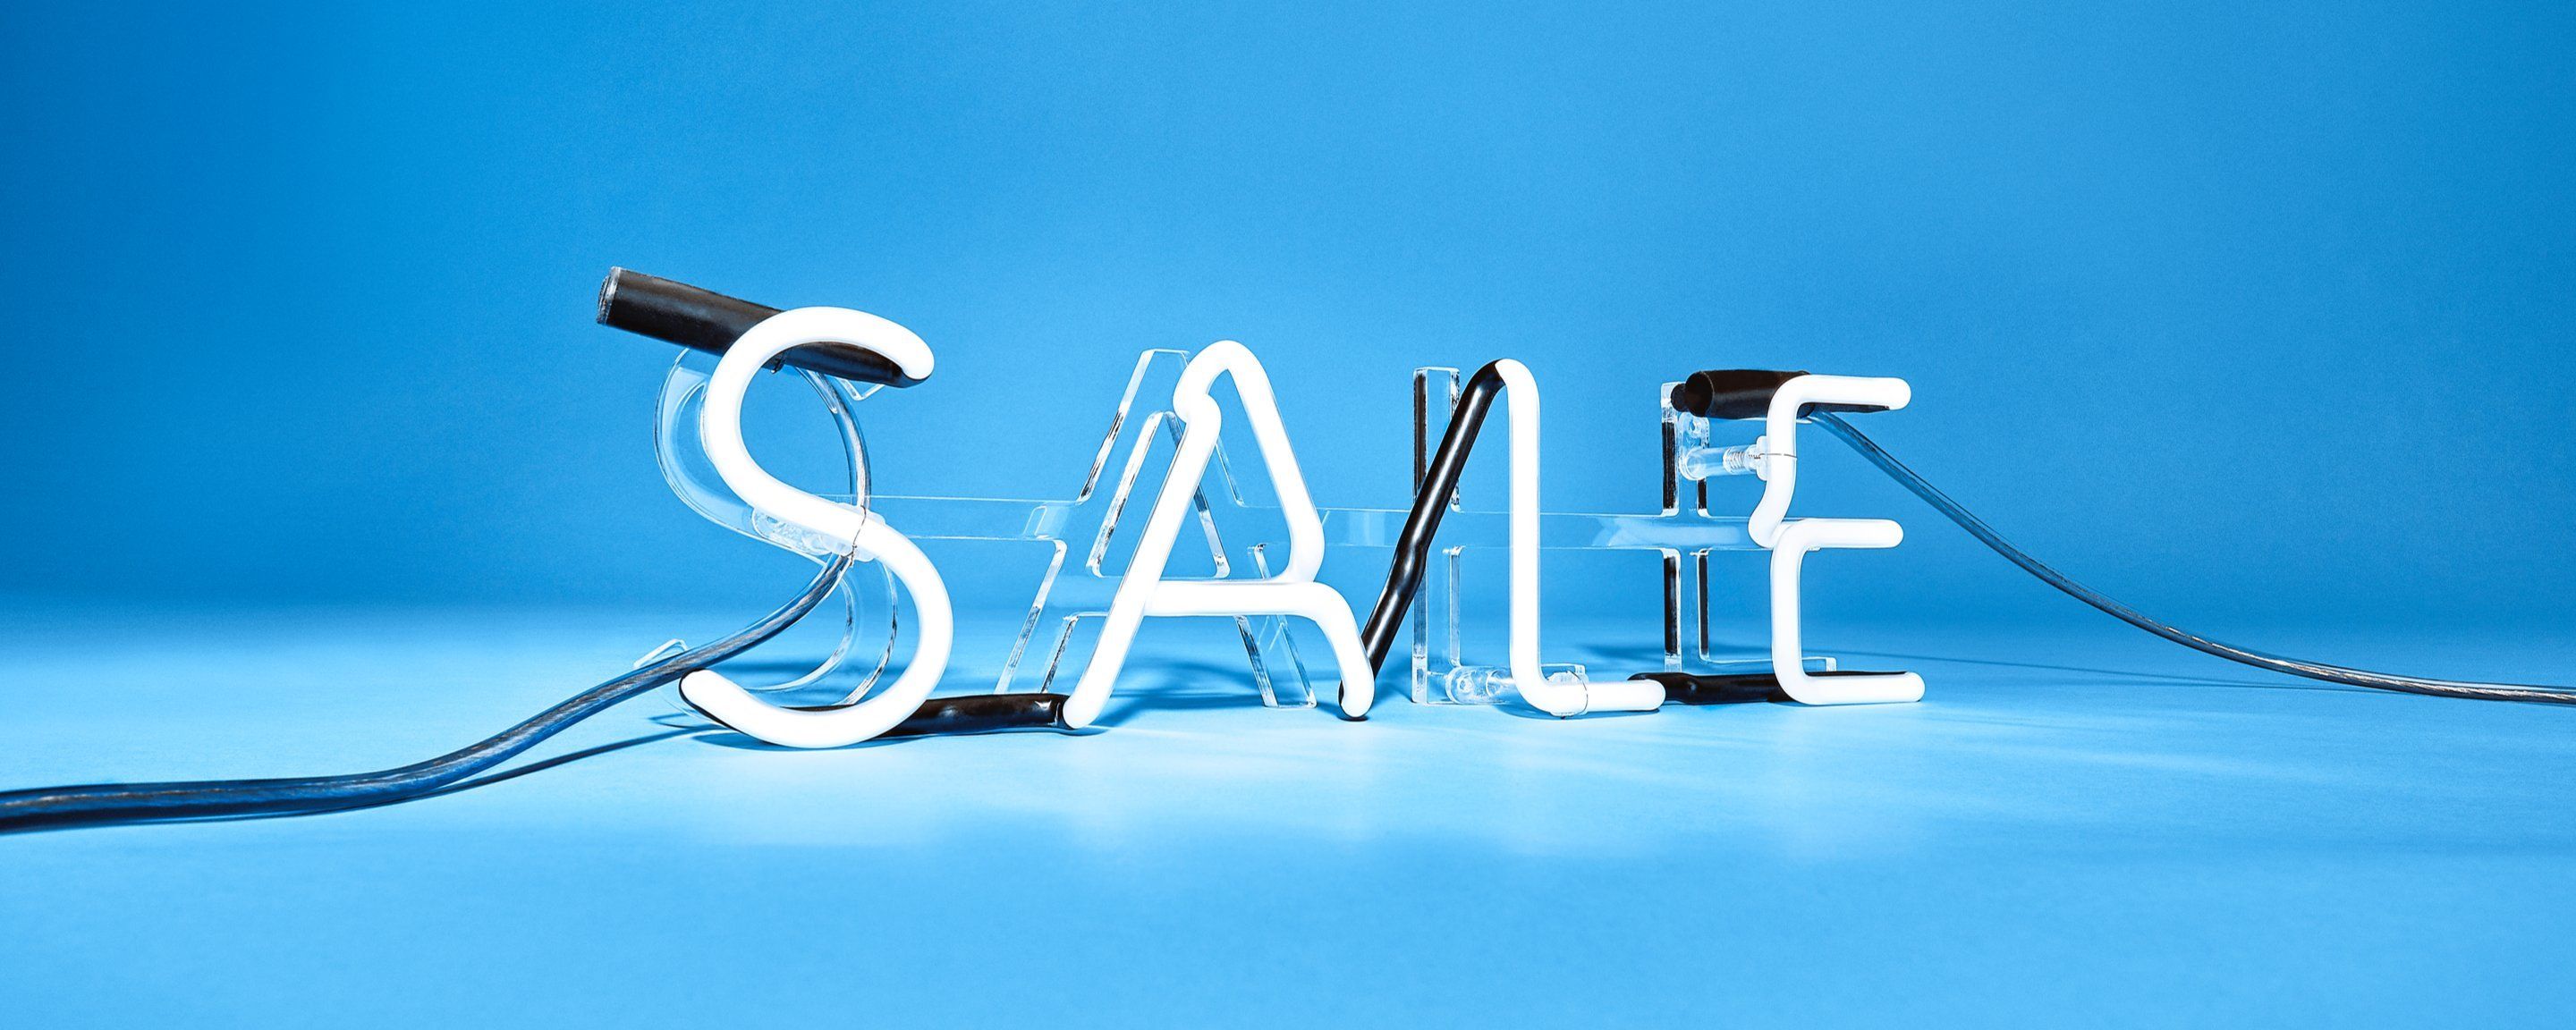 Mulberry Sale in neon letters